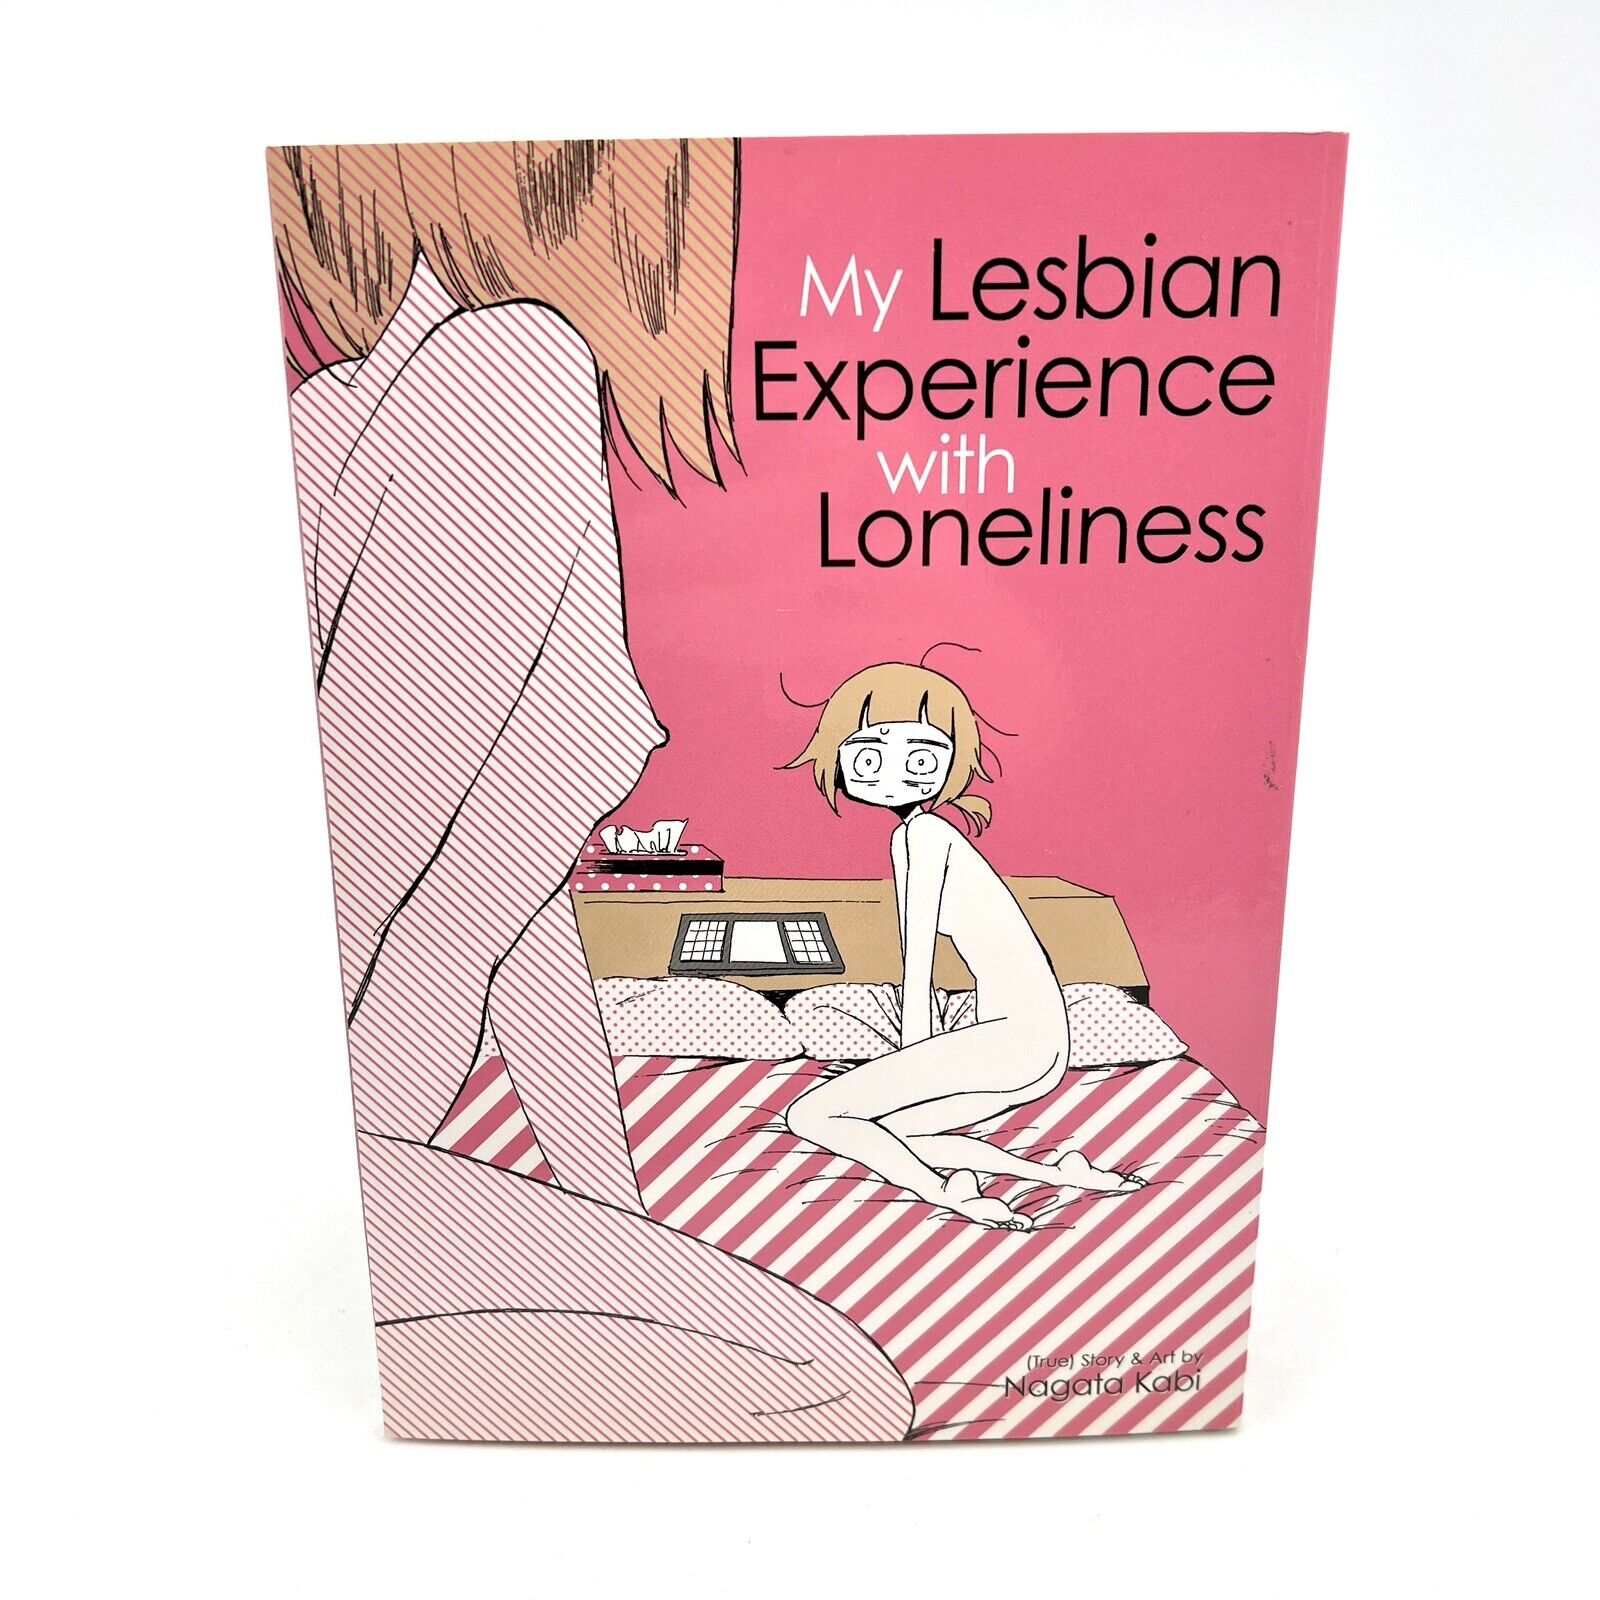 My Lesbian Experience with Loneliness by Nagata Kabi AUTOBIOGRAPHICAL LGBT MANGA